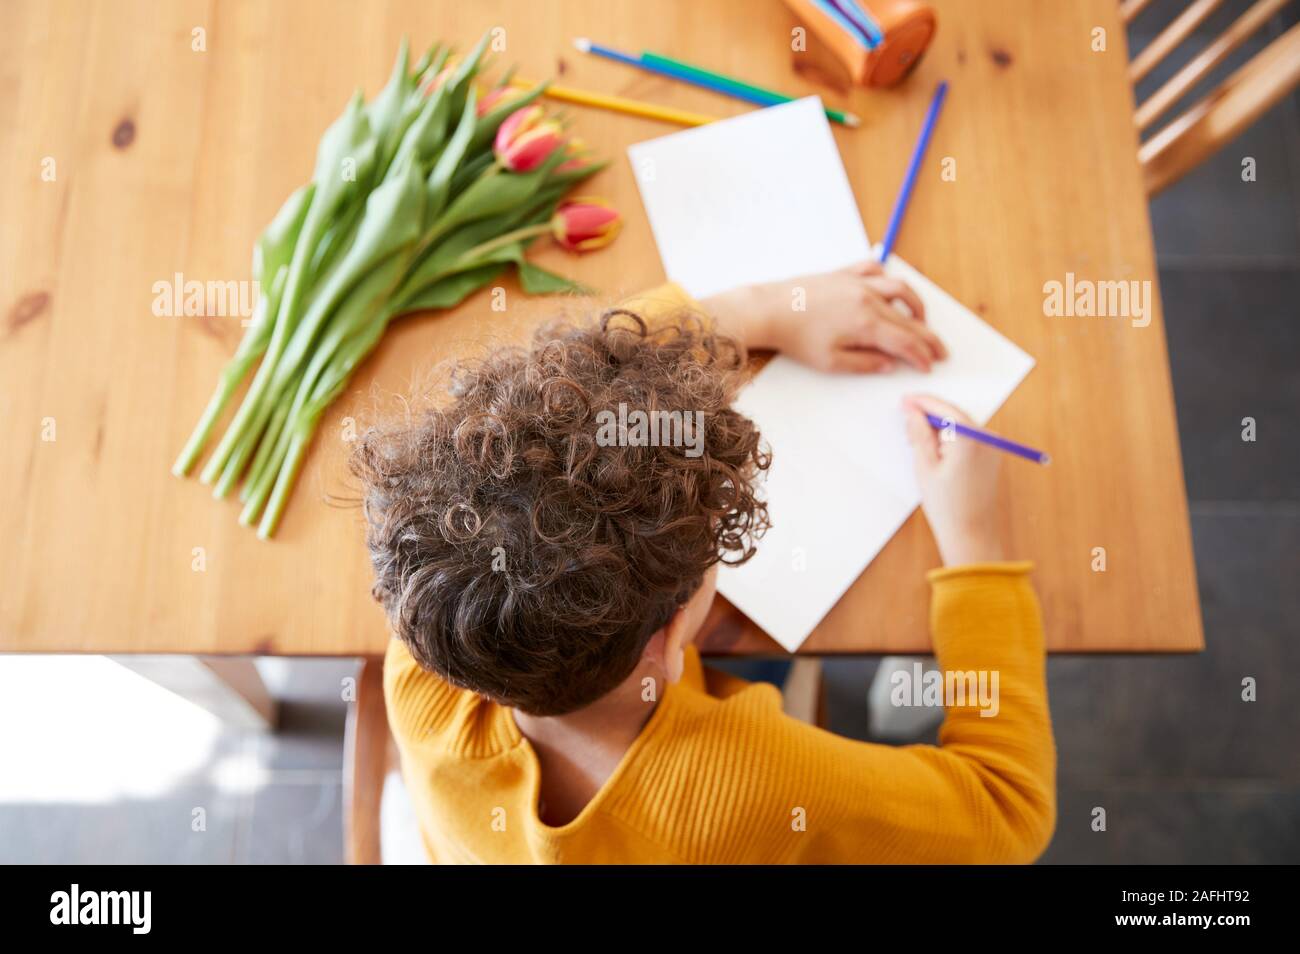 Overhead Shot Of Young Boy At Home With Bunch Of Flowers Writing In Mothers Day Card Stock Photo